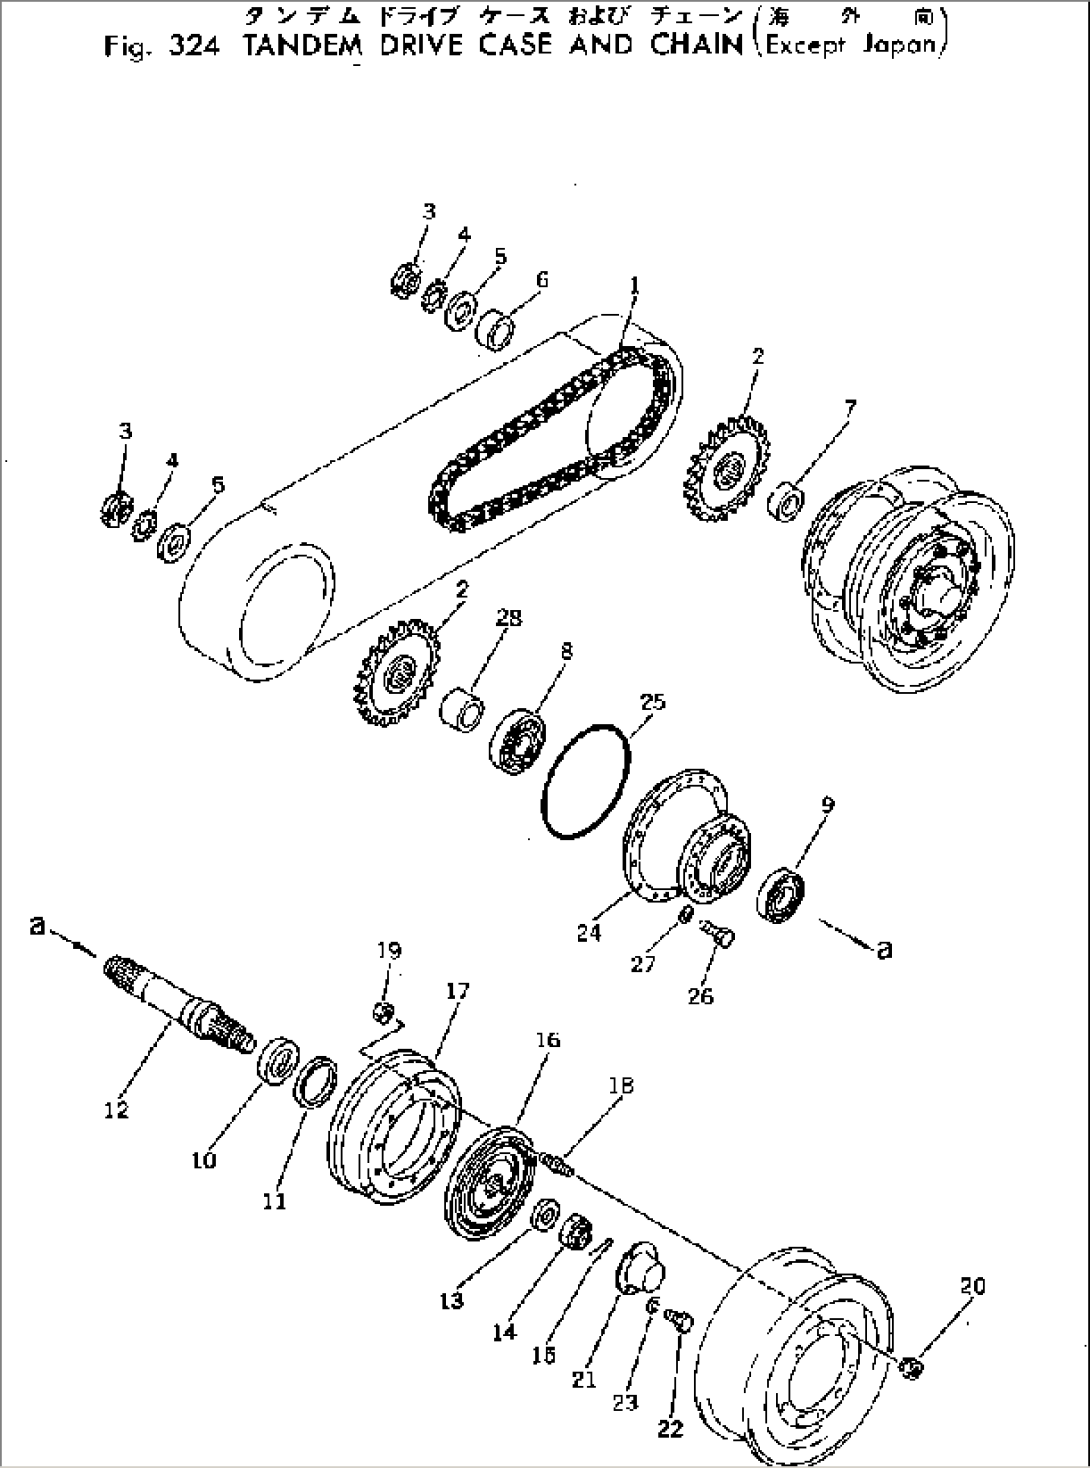 TANDEM DRIVE GEAR AND CHAIN (EXCEPT JAPAN)